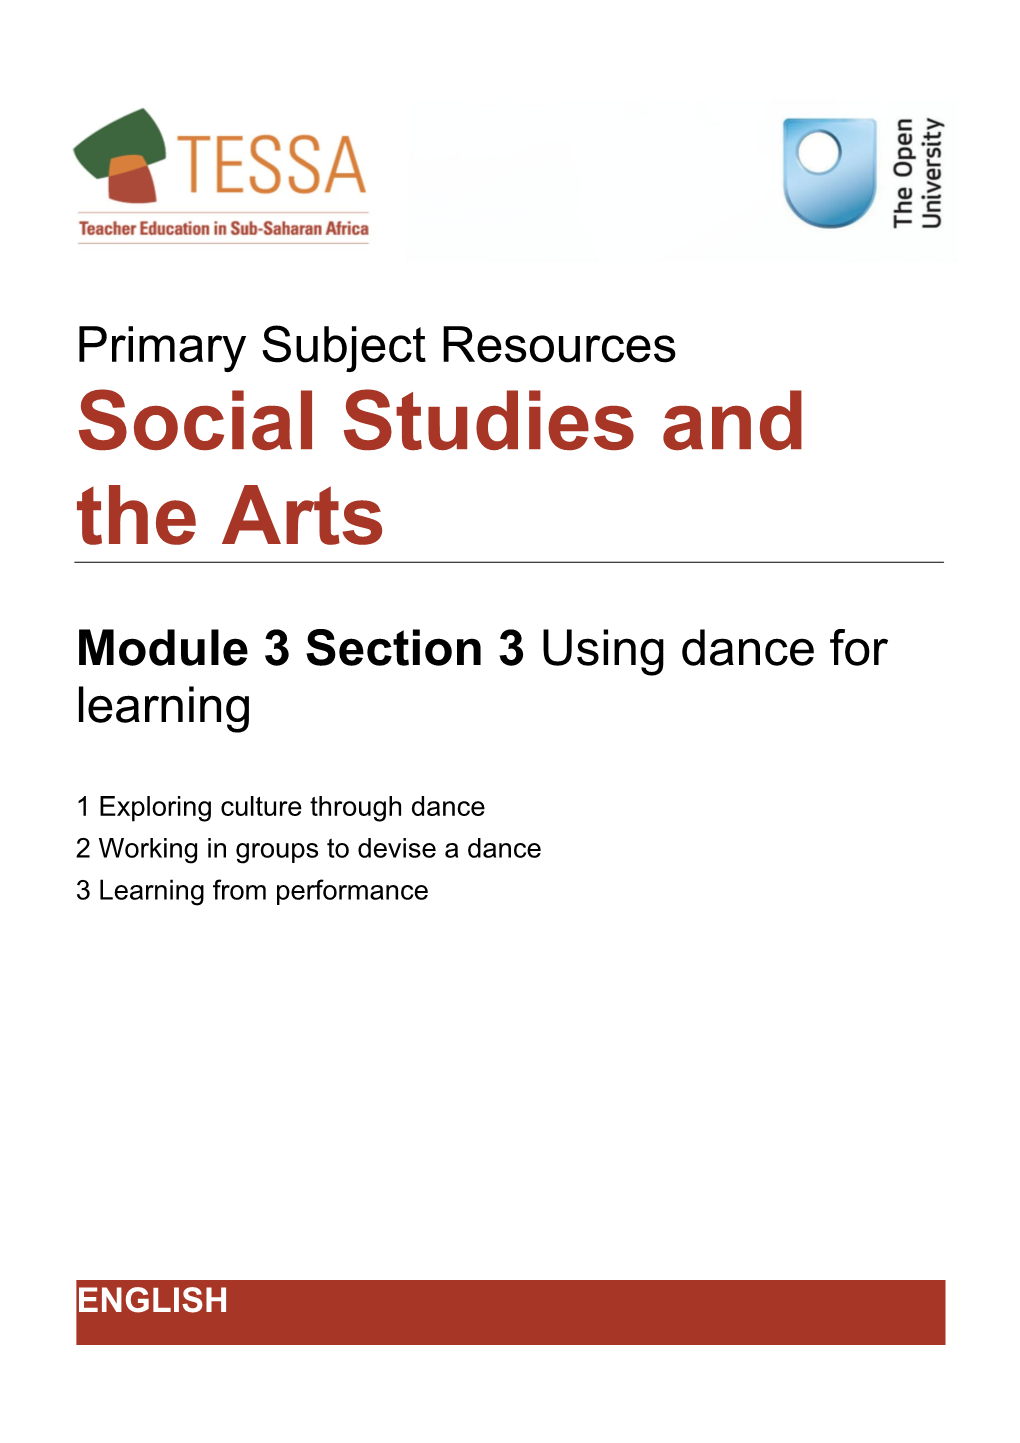 Section 3 : Using Dance for Learning